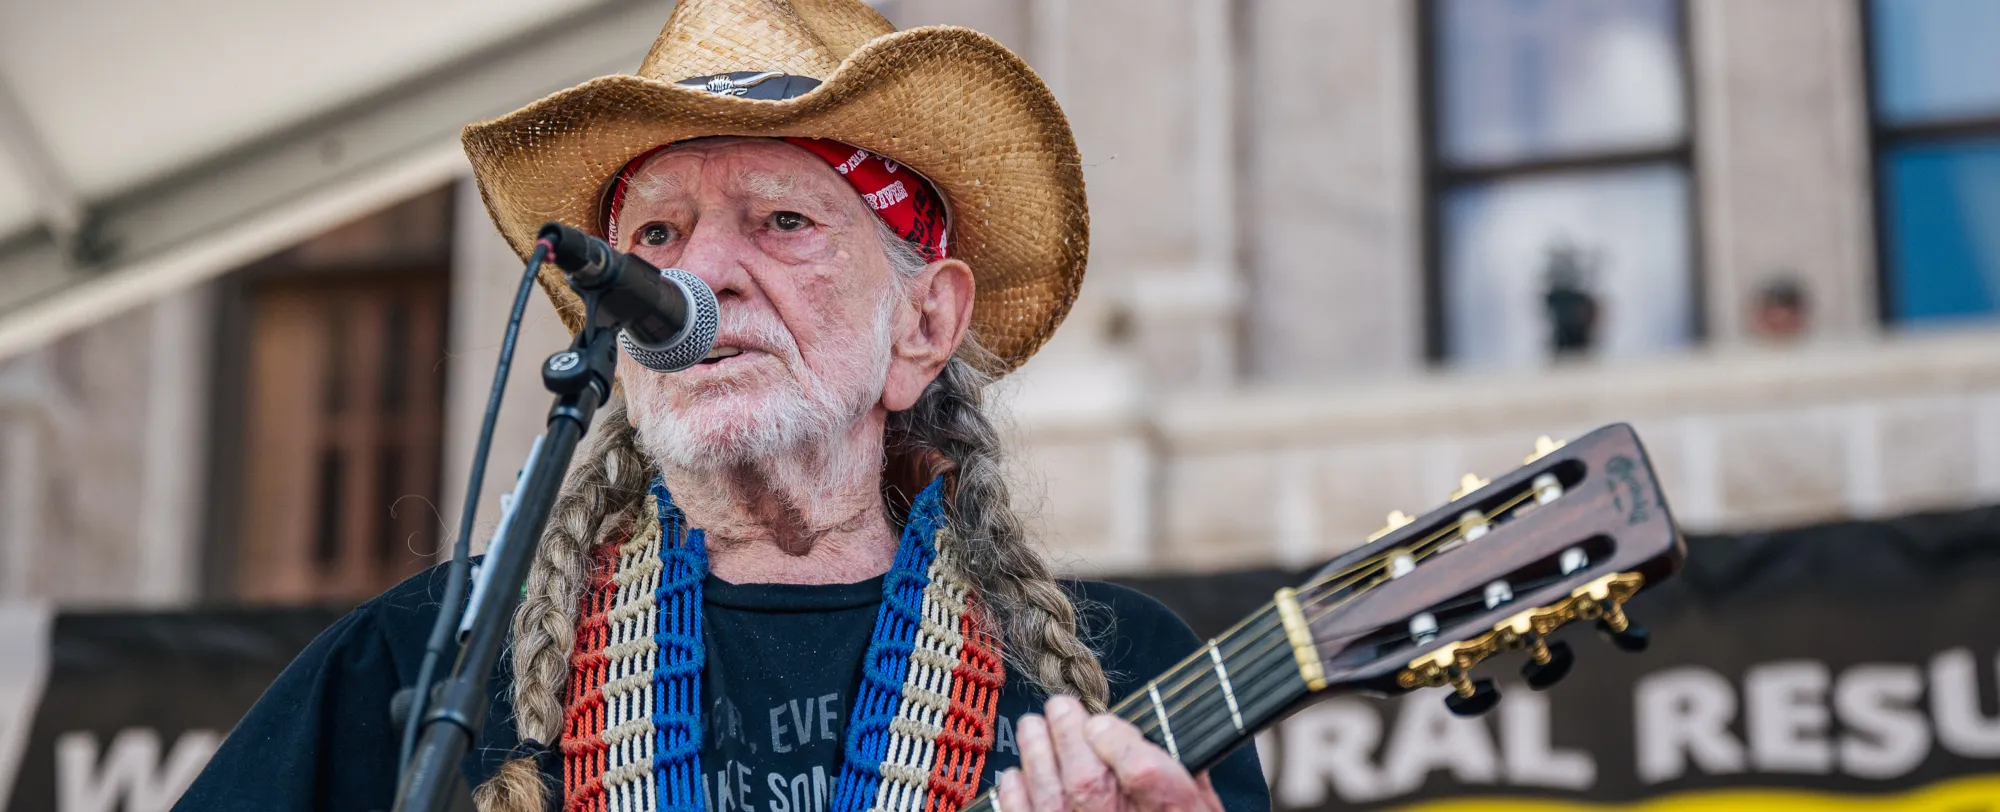 4 Iconic Willie Nelson Collaborations That Will Make You Love the Country Singer Even More